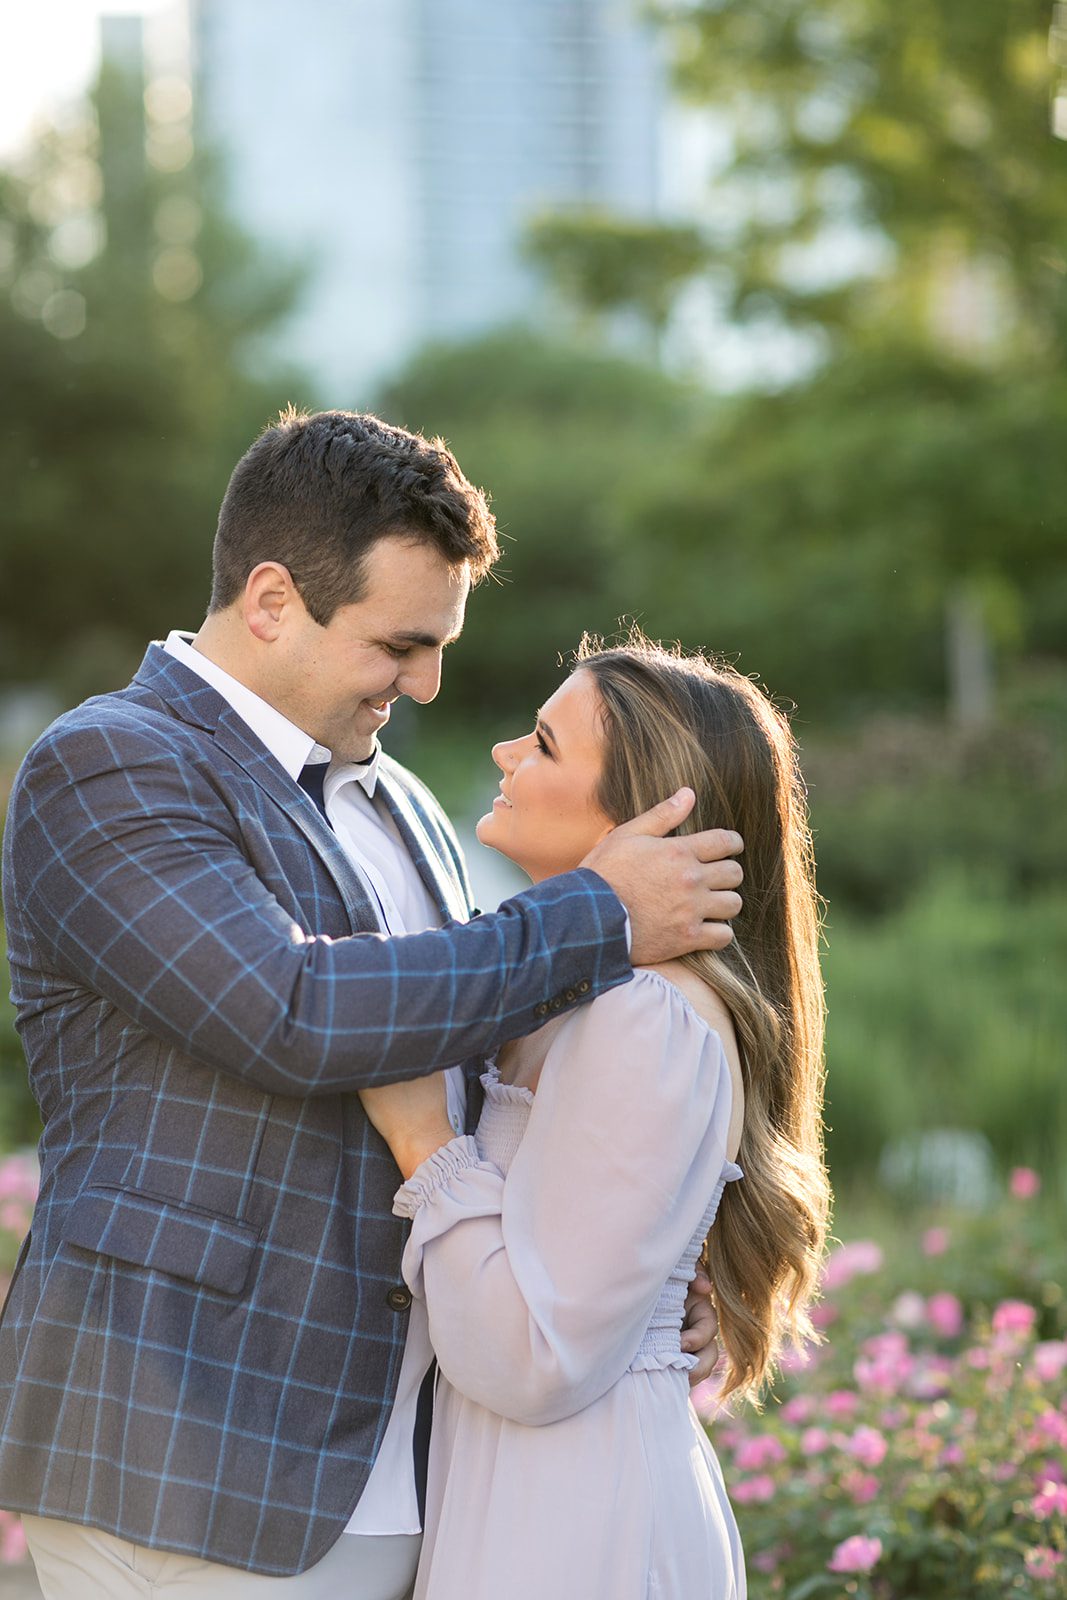 man pushes hair behind woman's ear during engagement photoshoot